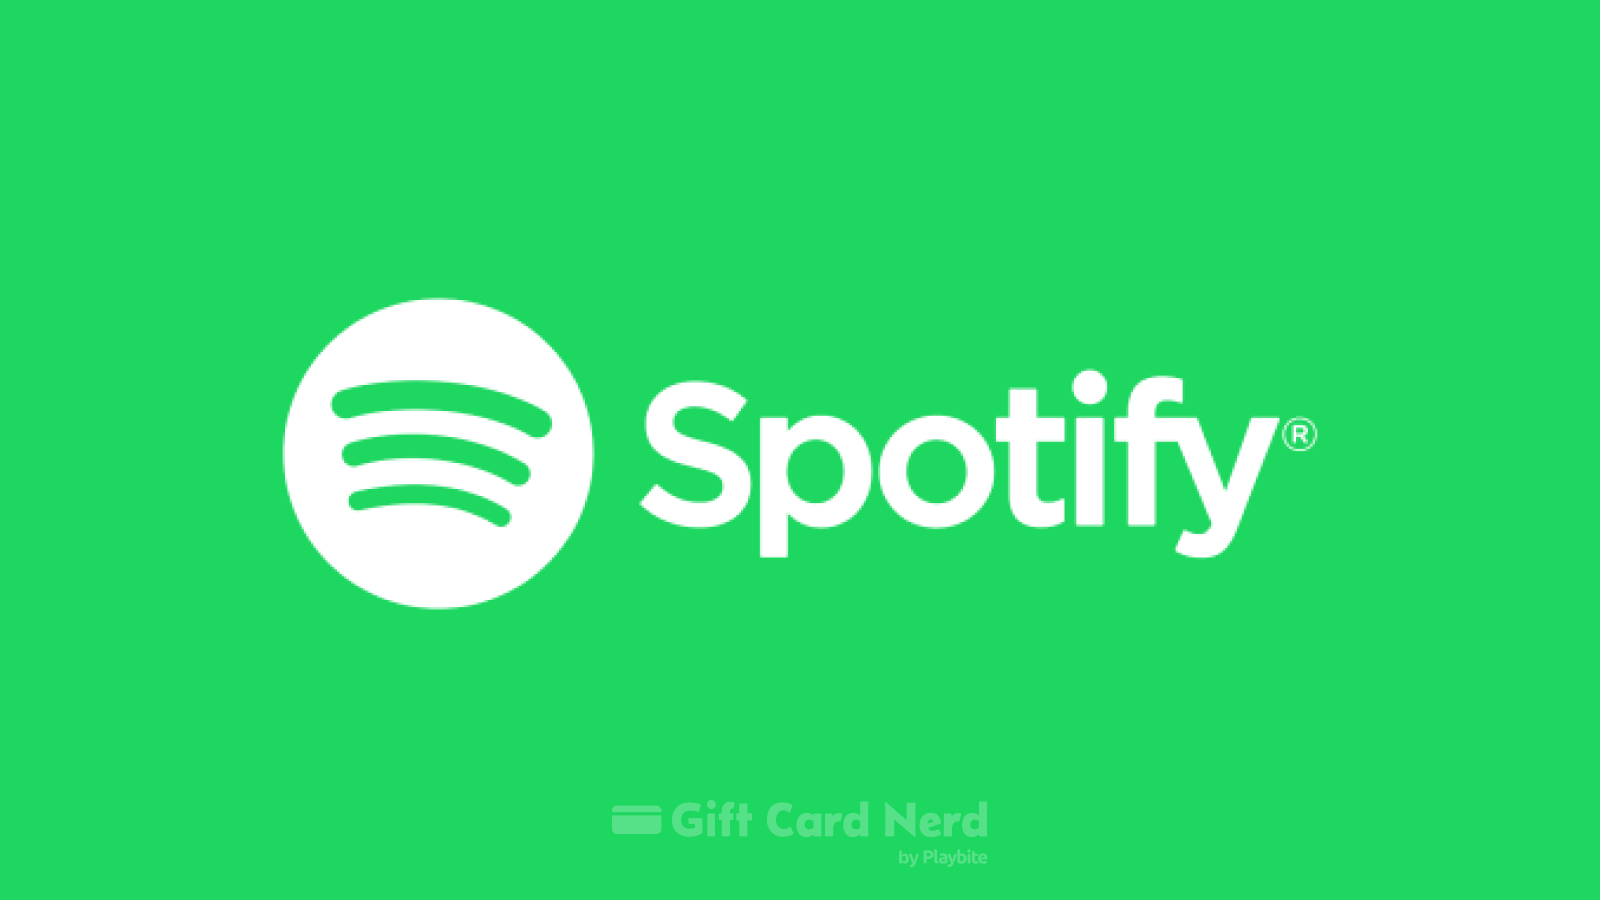 Does Walmart Sell Spotify Gift Cards?